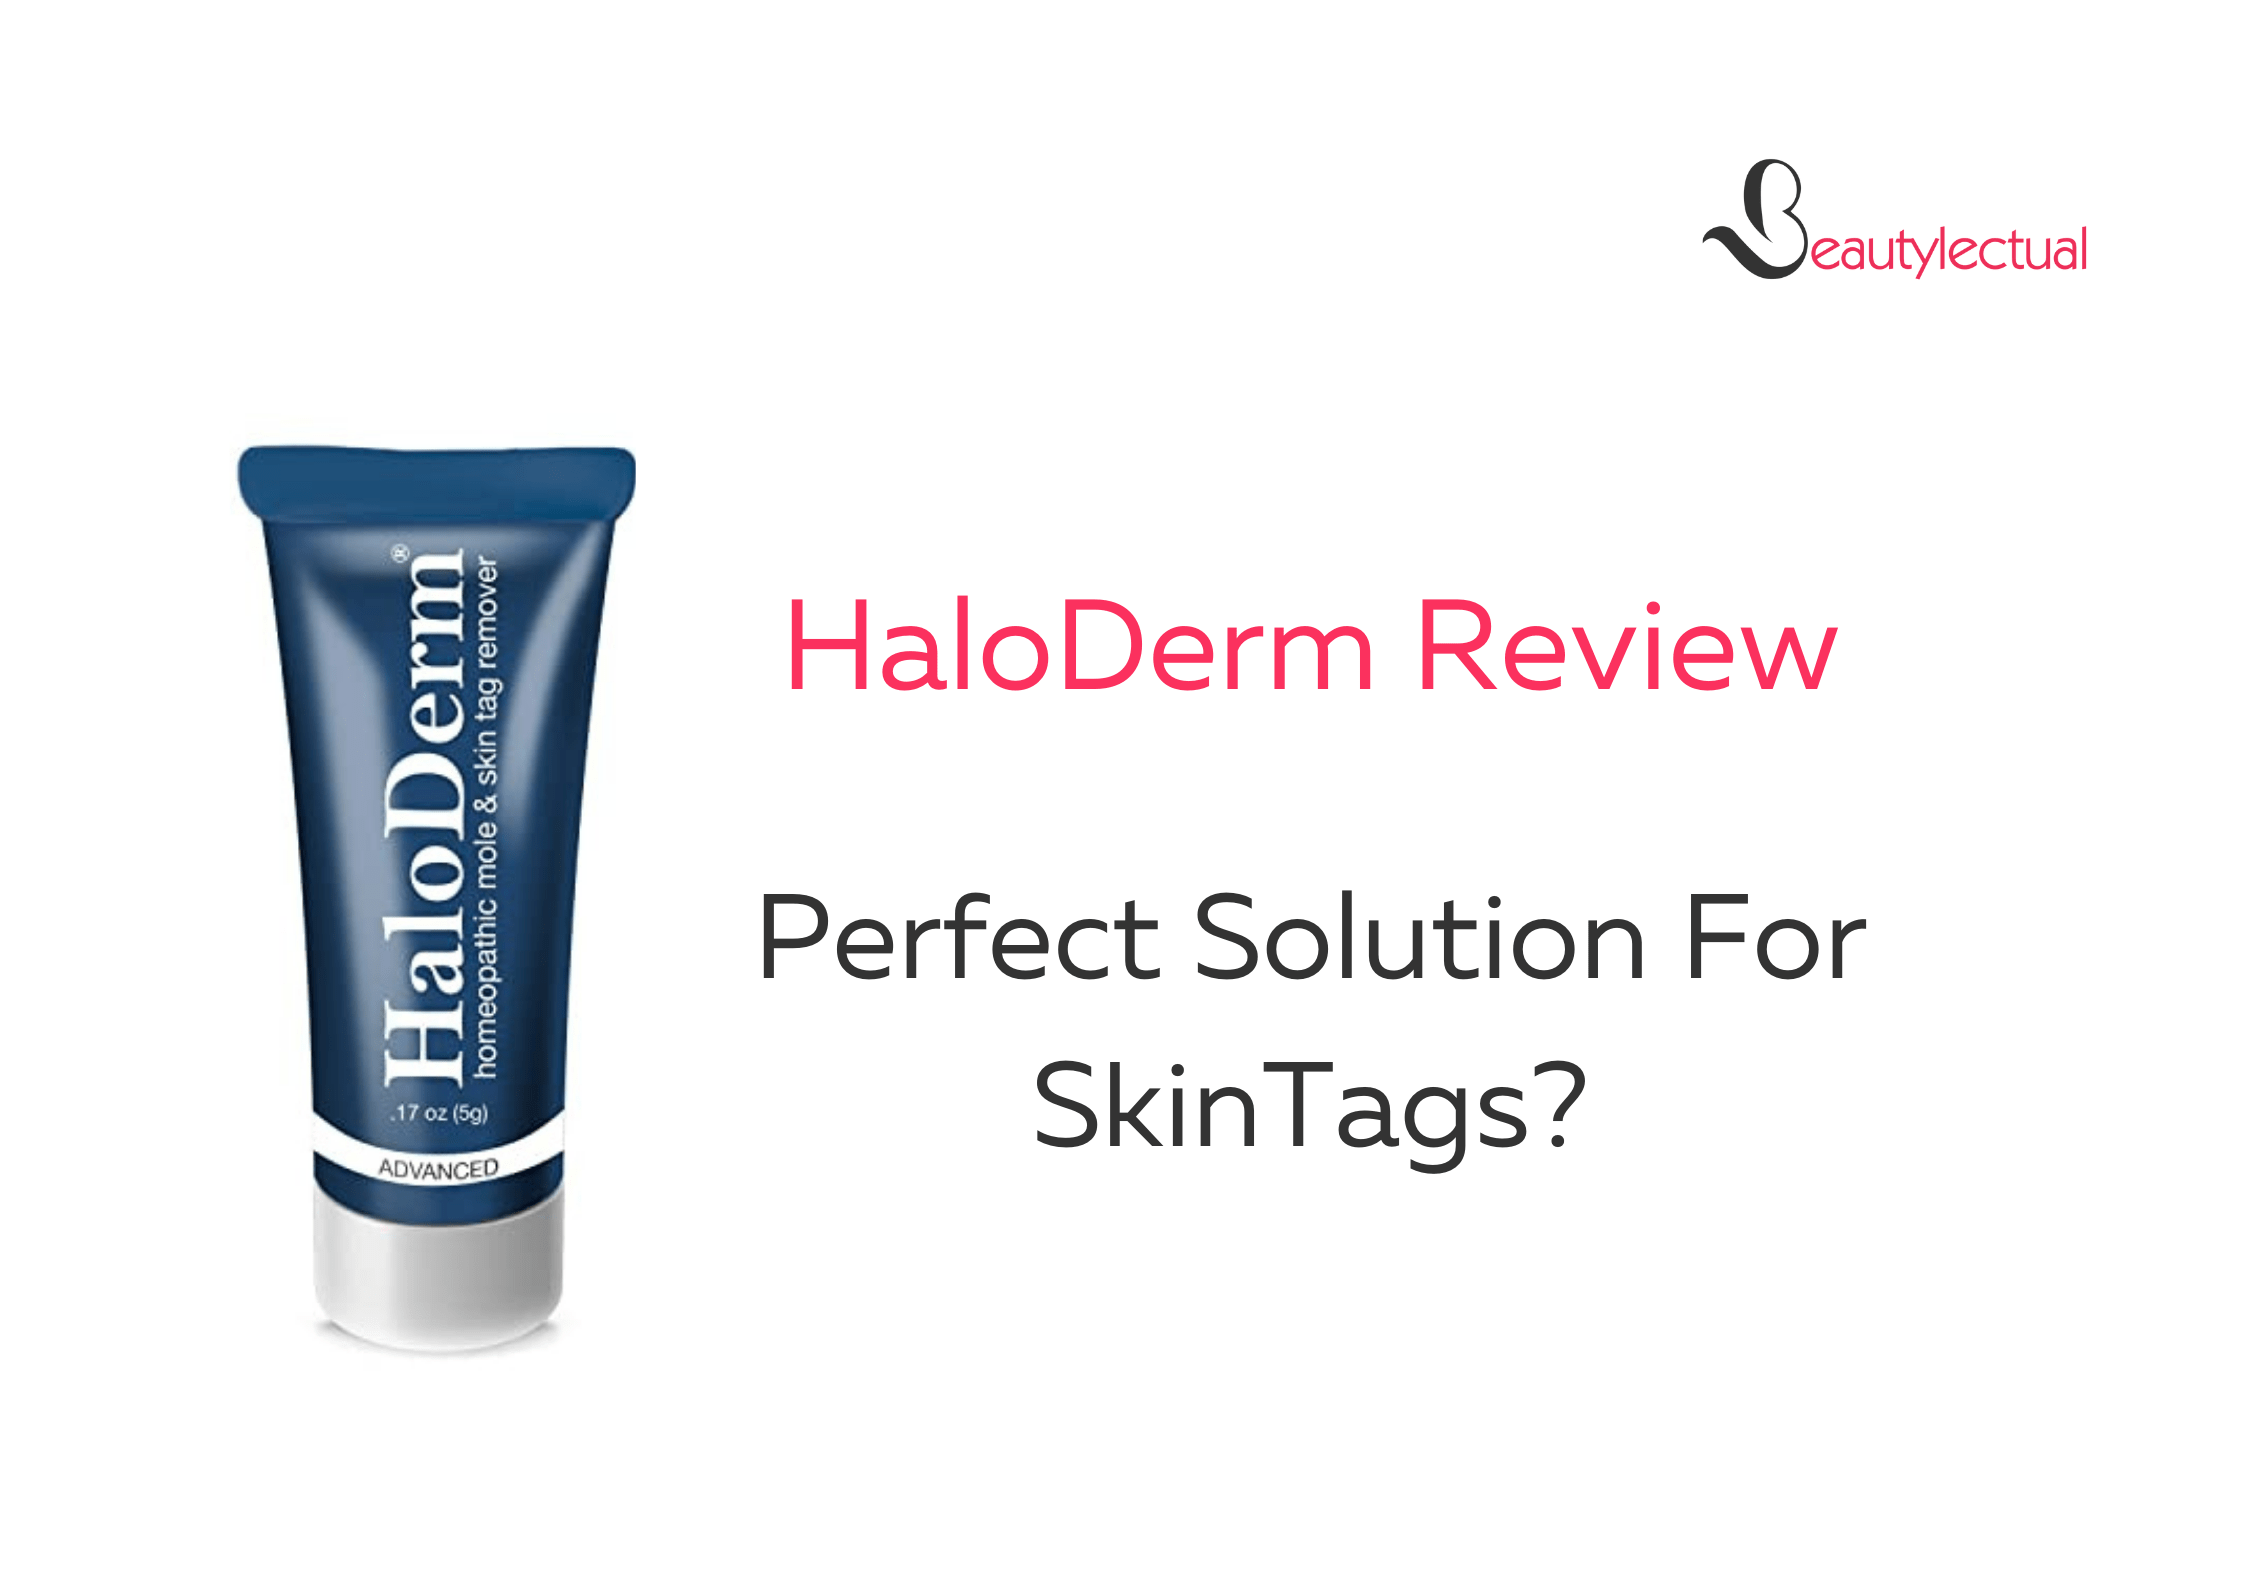 HaloDerm Review